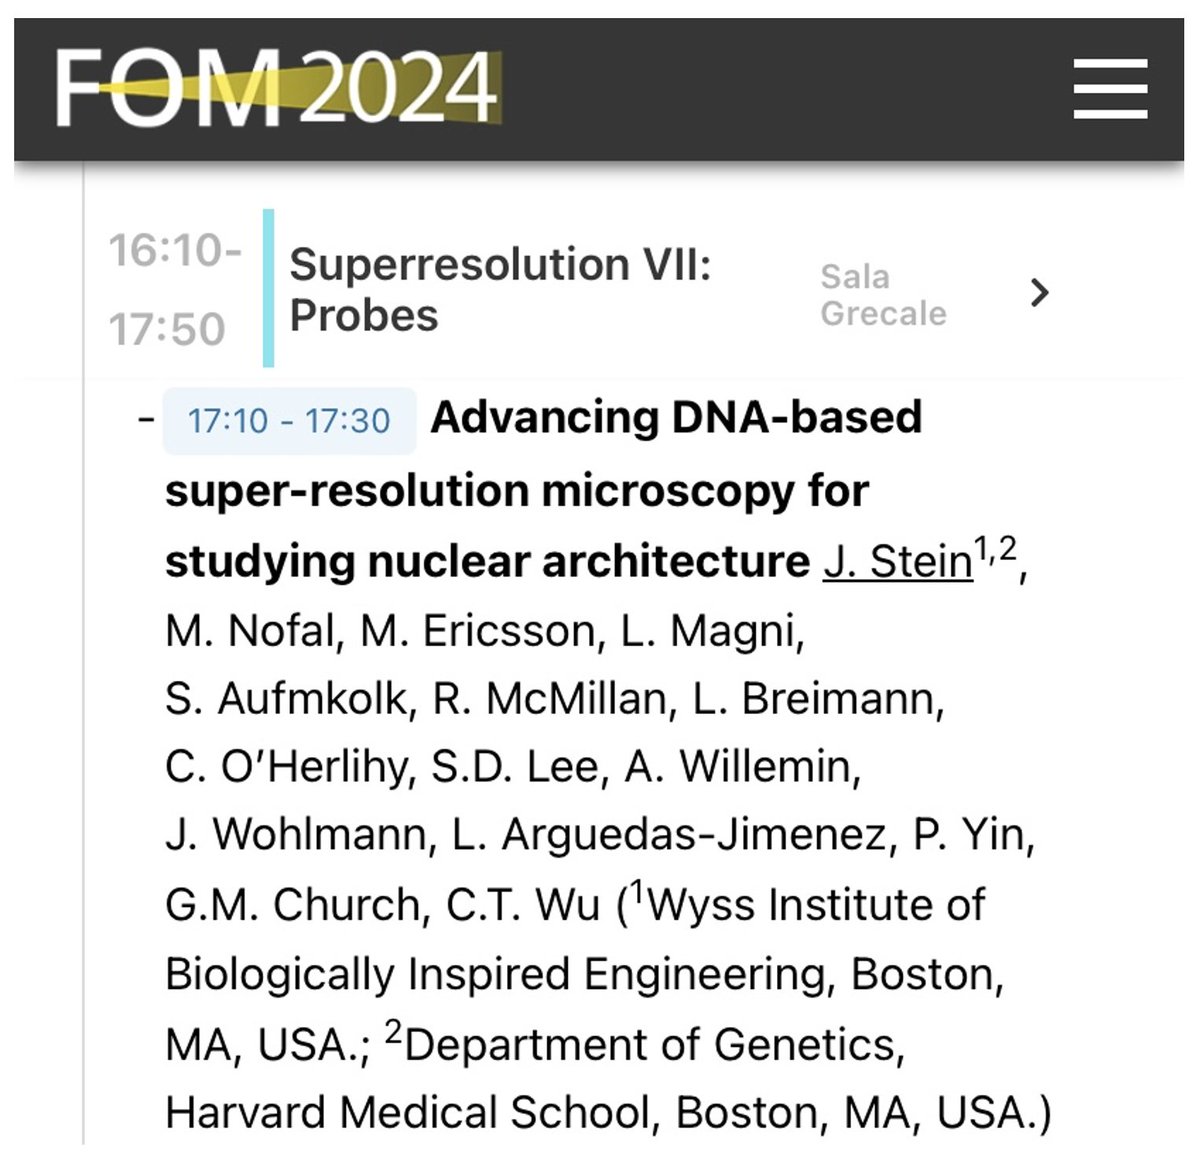 Excited to share our most recent work on advancing nuclear DNA-PAINT imaging at #FOM2024 today at 5:10pm🔬🧬. See you there!